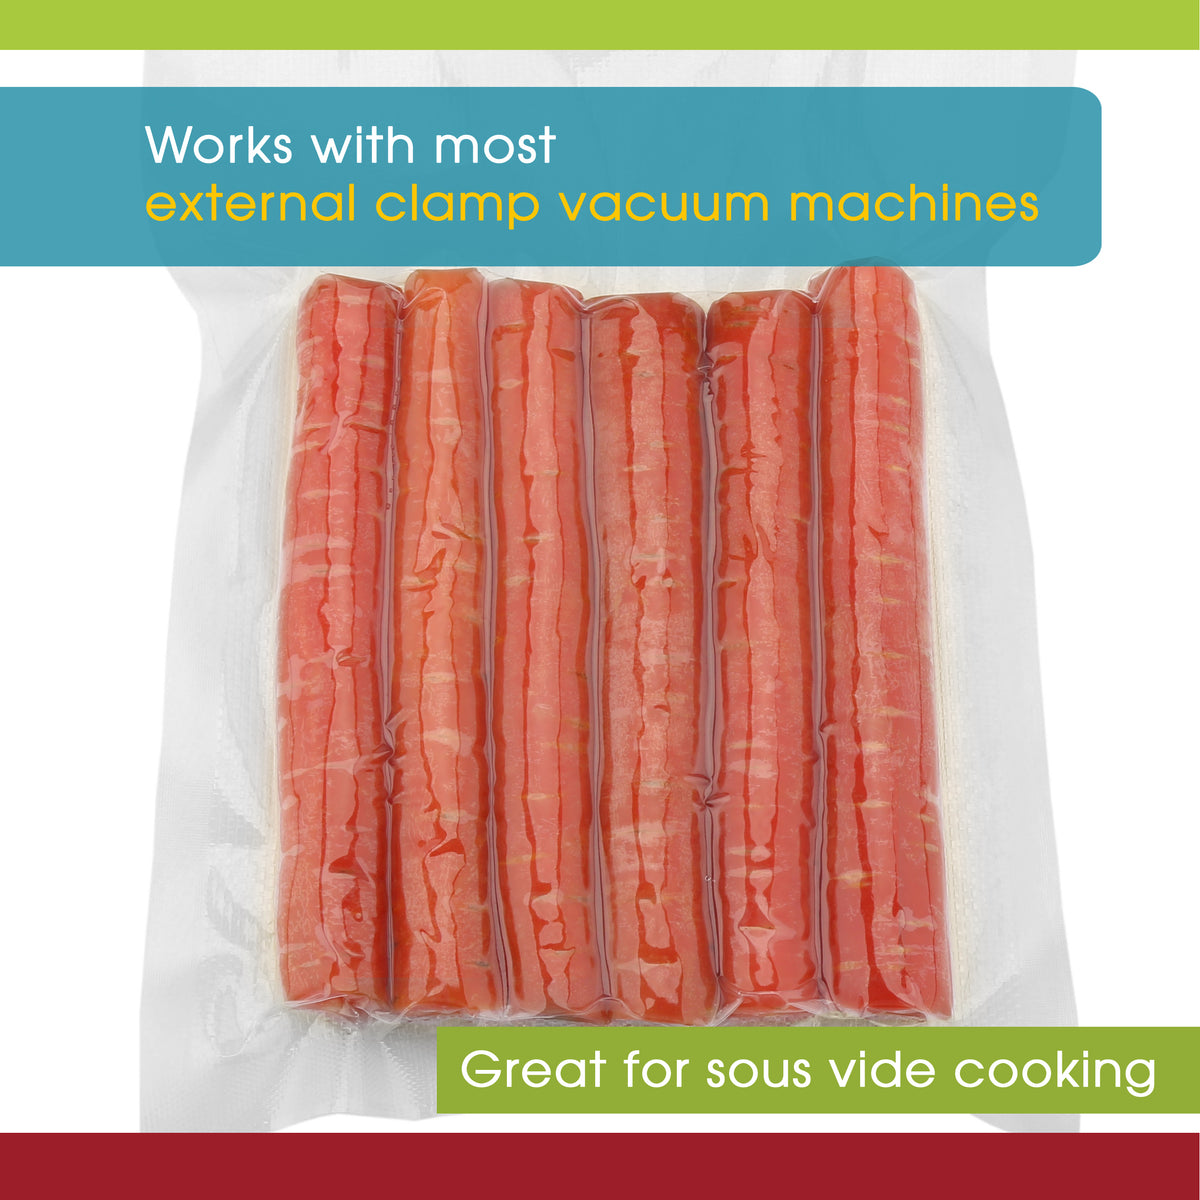 A picture of a vacuum bag with carrots, describing these bags with other brands of vacuum sealers and can be used for sous vide cooking.